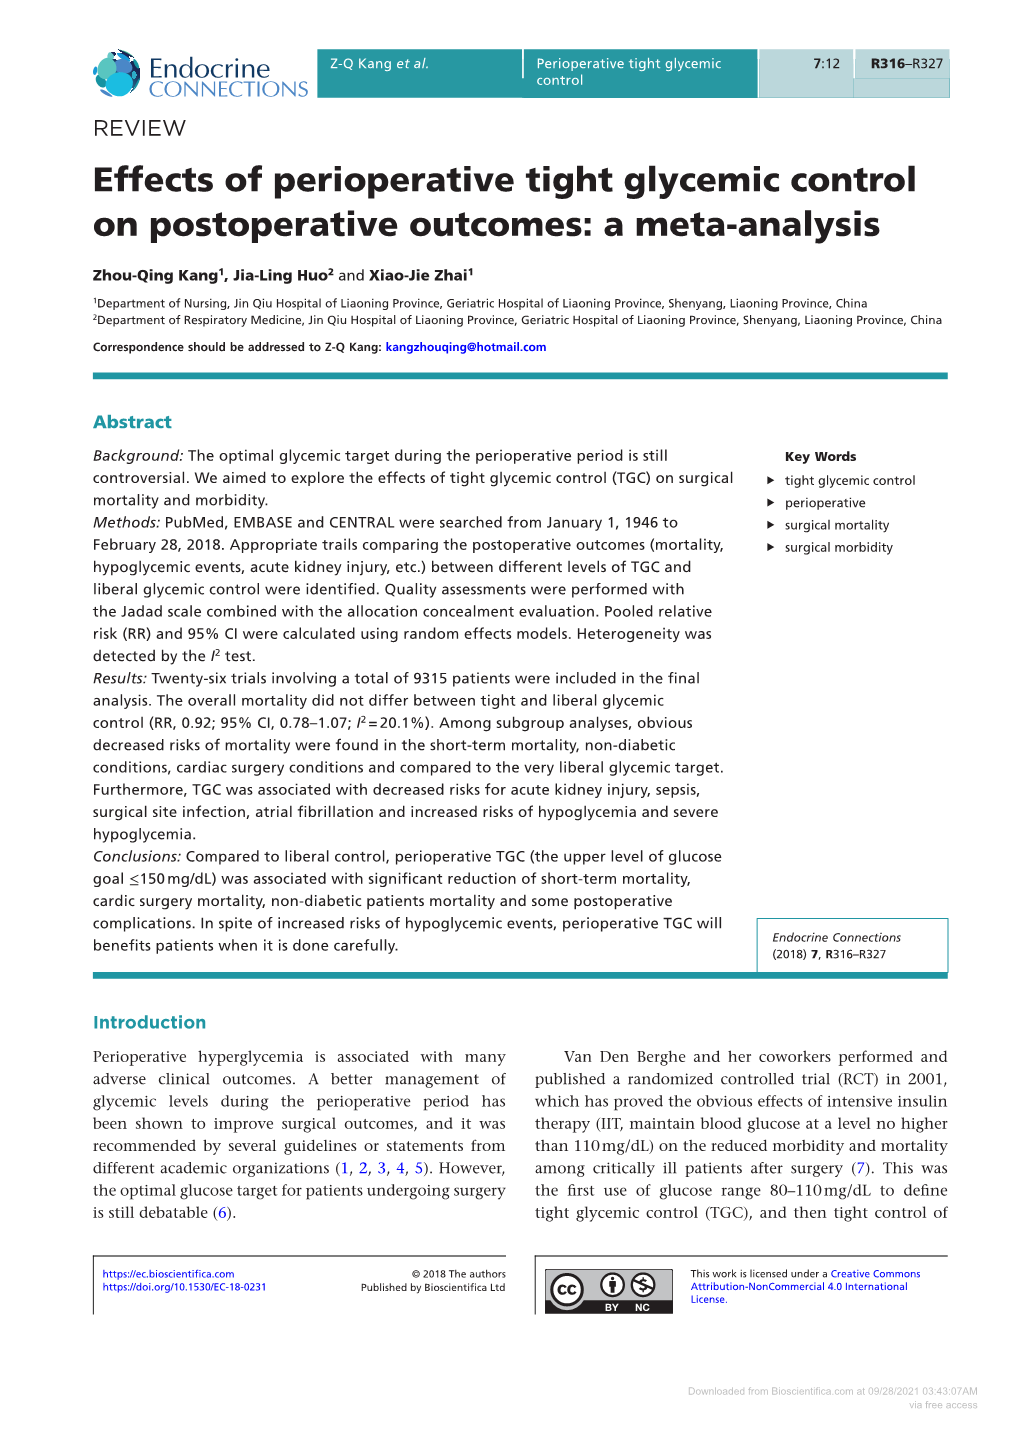 Effects of Perioperative Tight Glycemic Control on Postoperative Outcomes: a Meta-Analysis